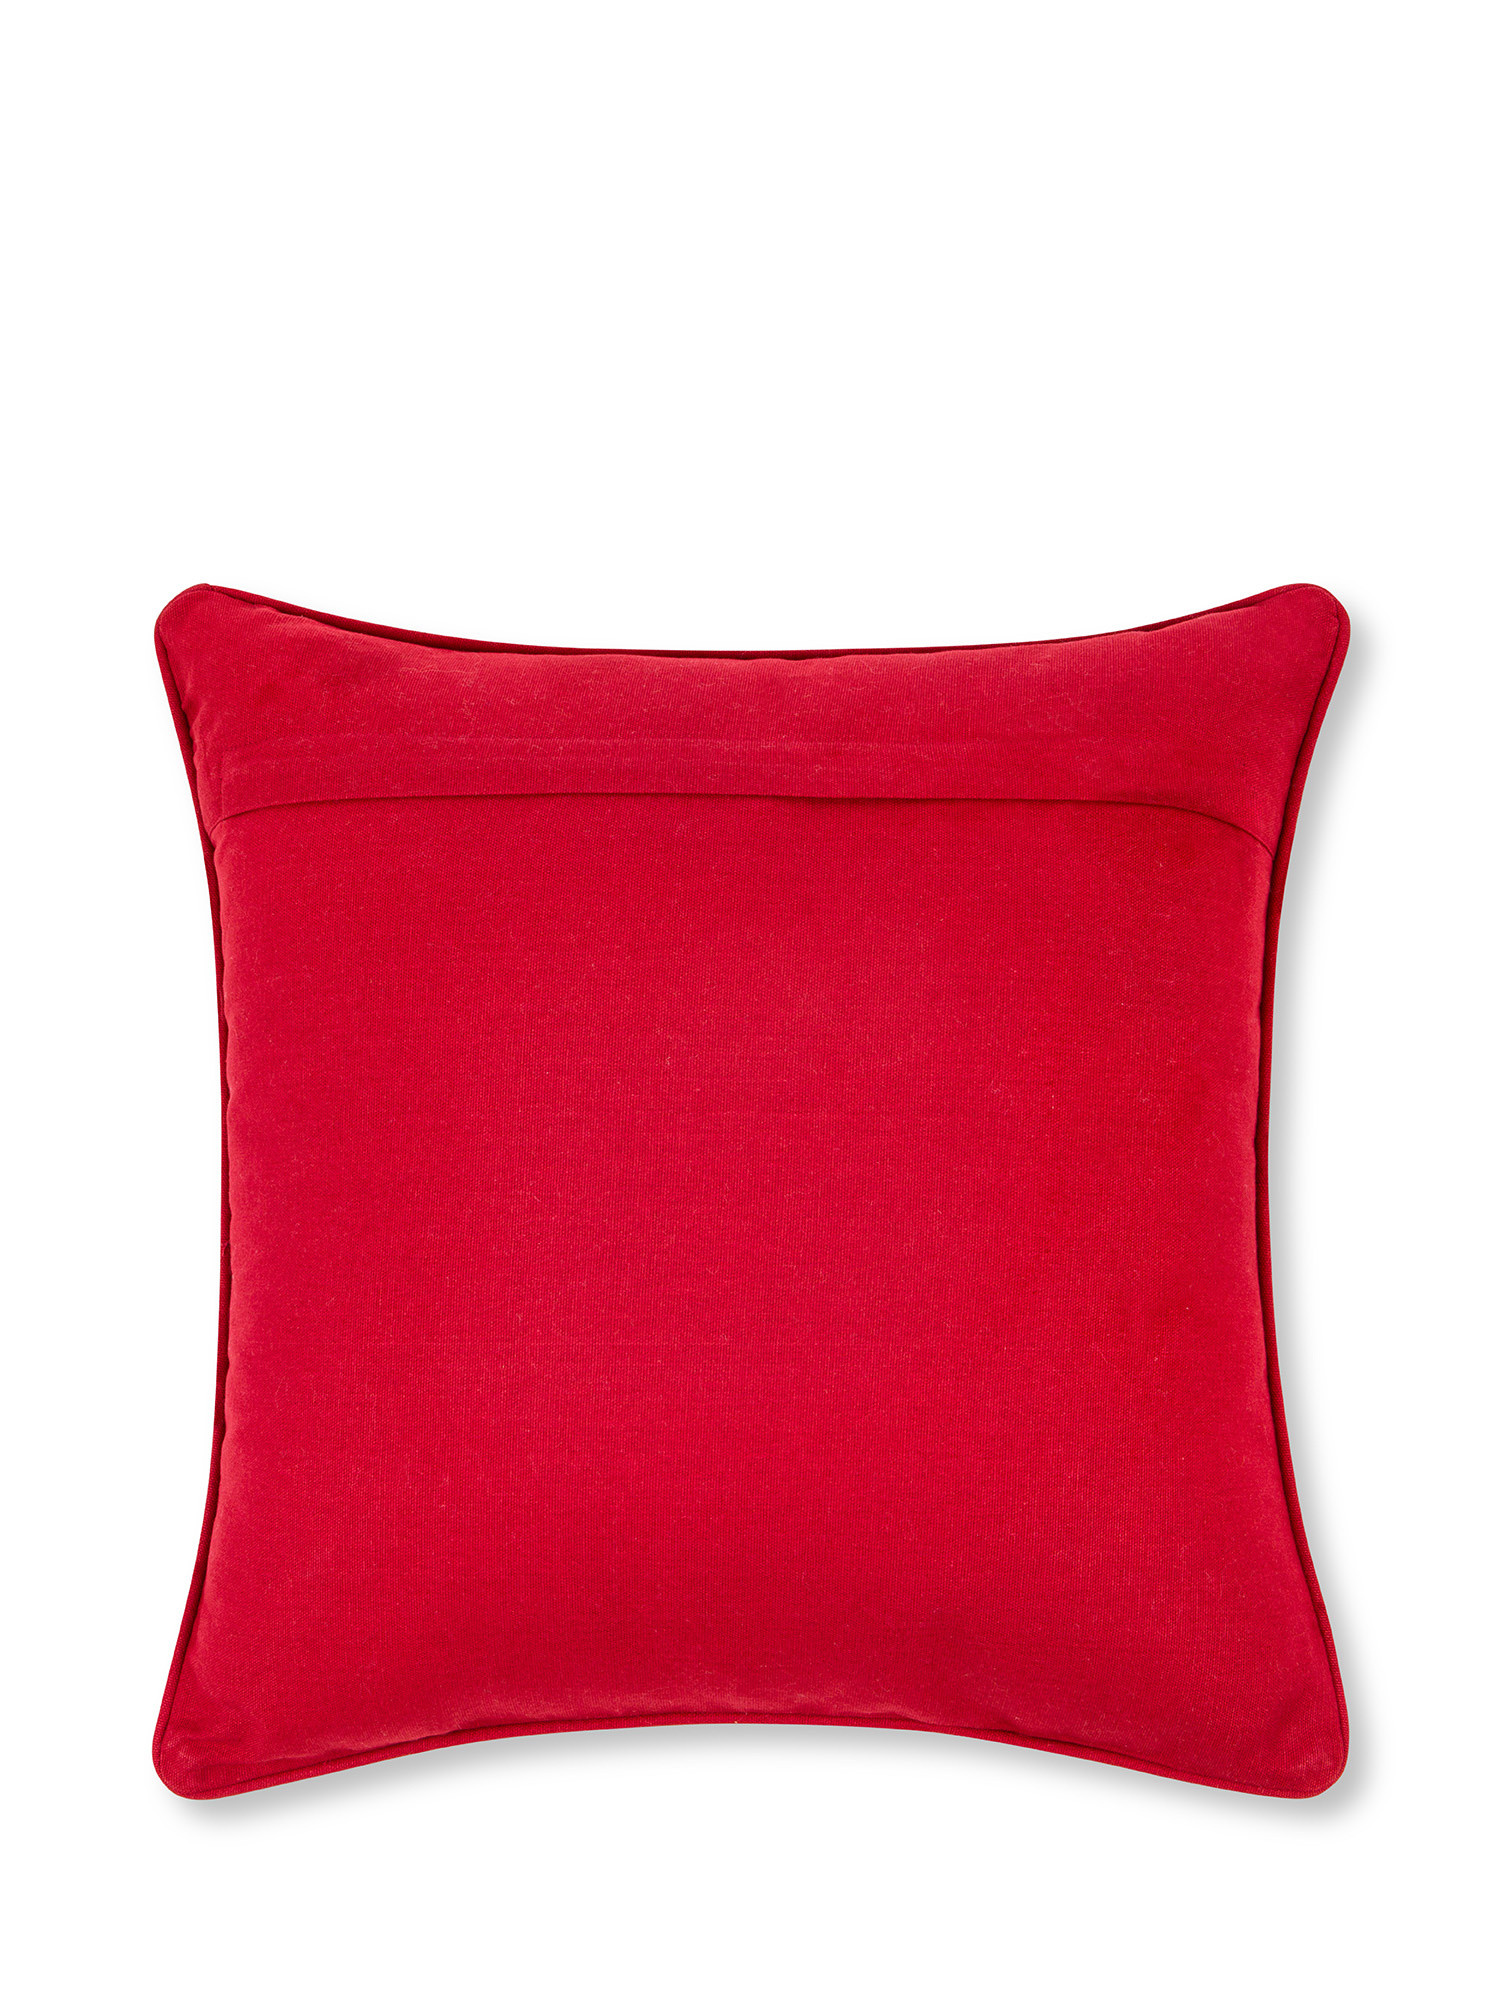 Embroidered tartan fabric cushion 45x45cm, Red, large image number 1